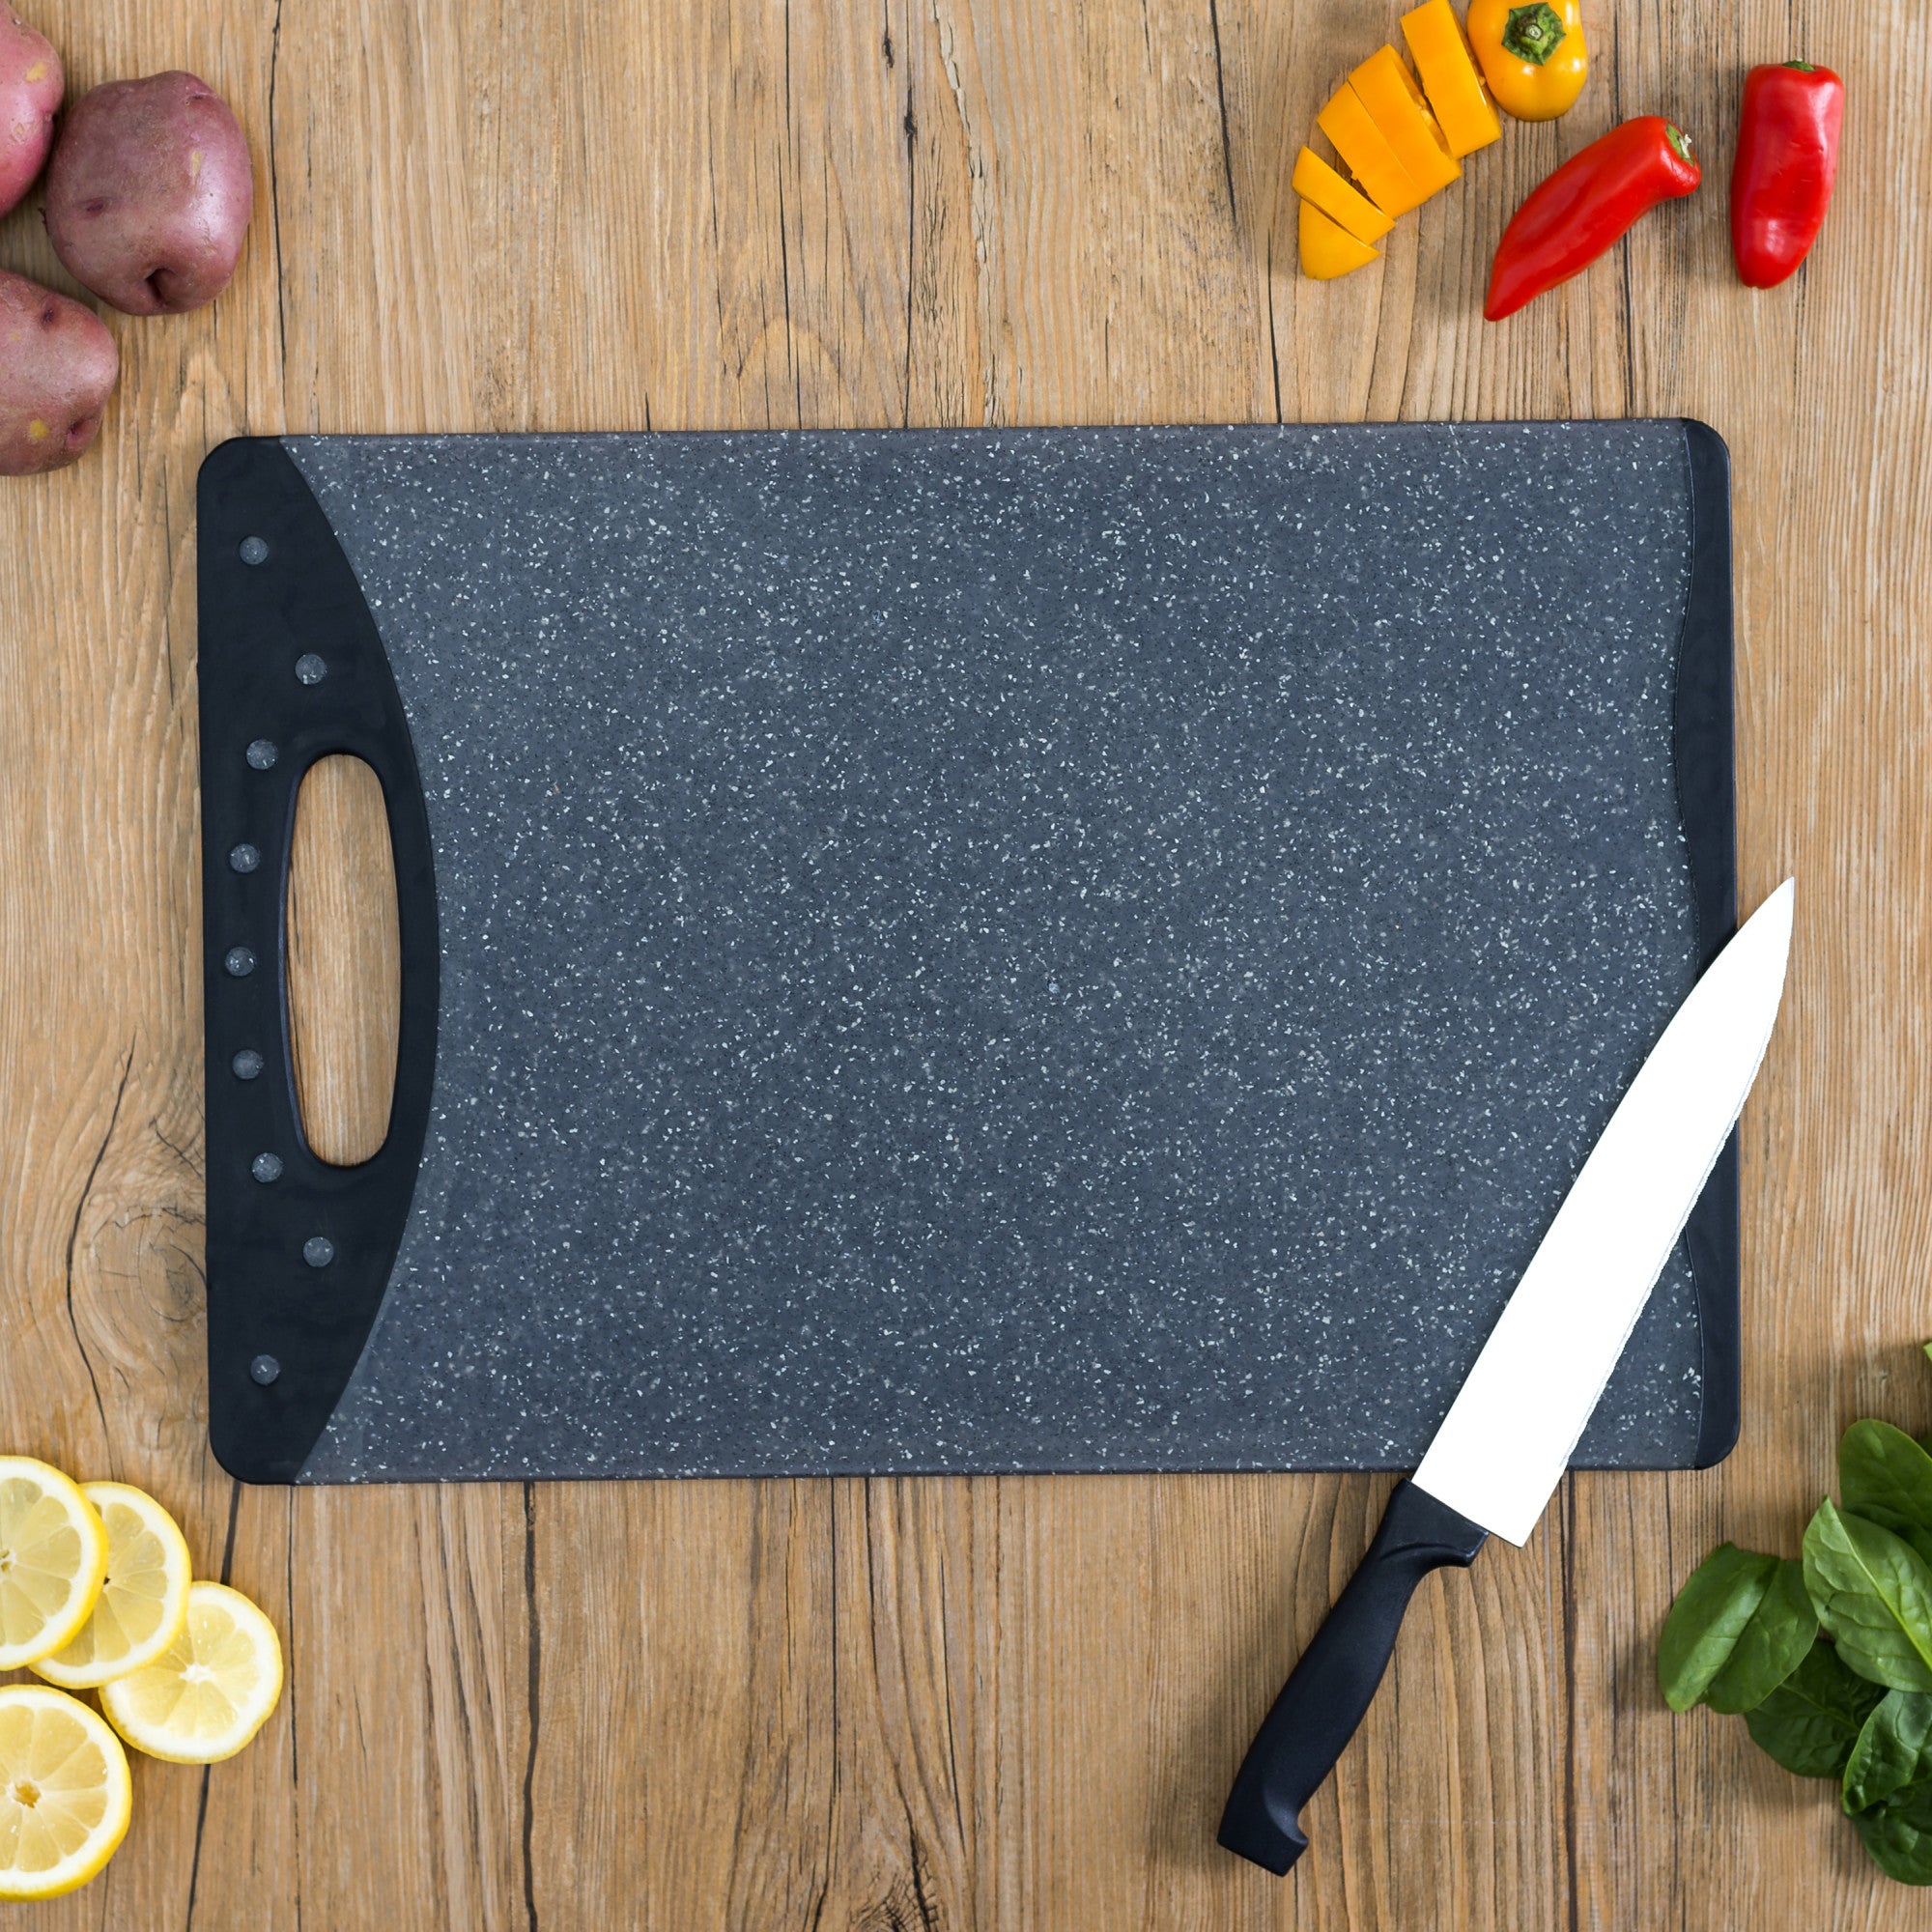 Home Basics Double Sided 12" x 18" Granite Plastic Cutting Board - Assorted Colors